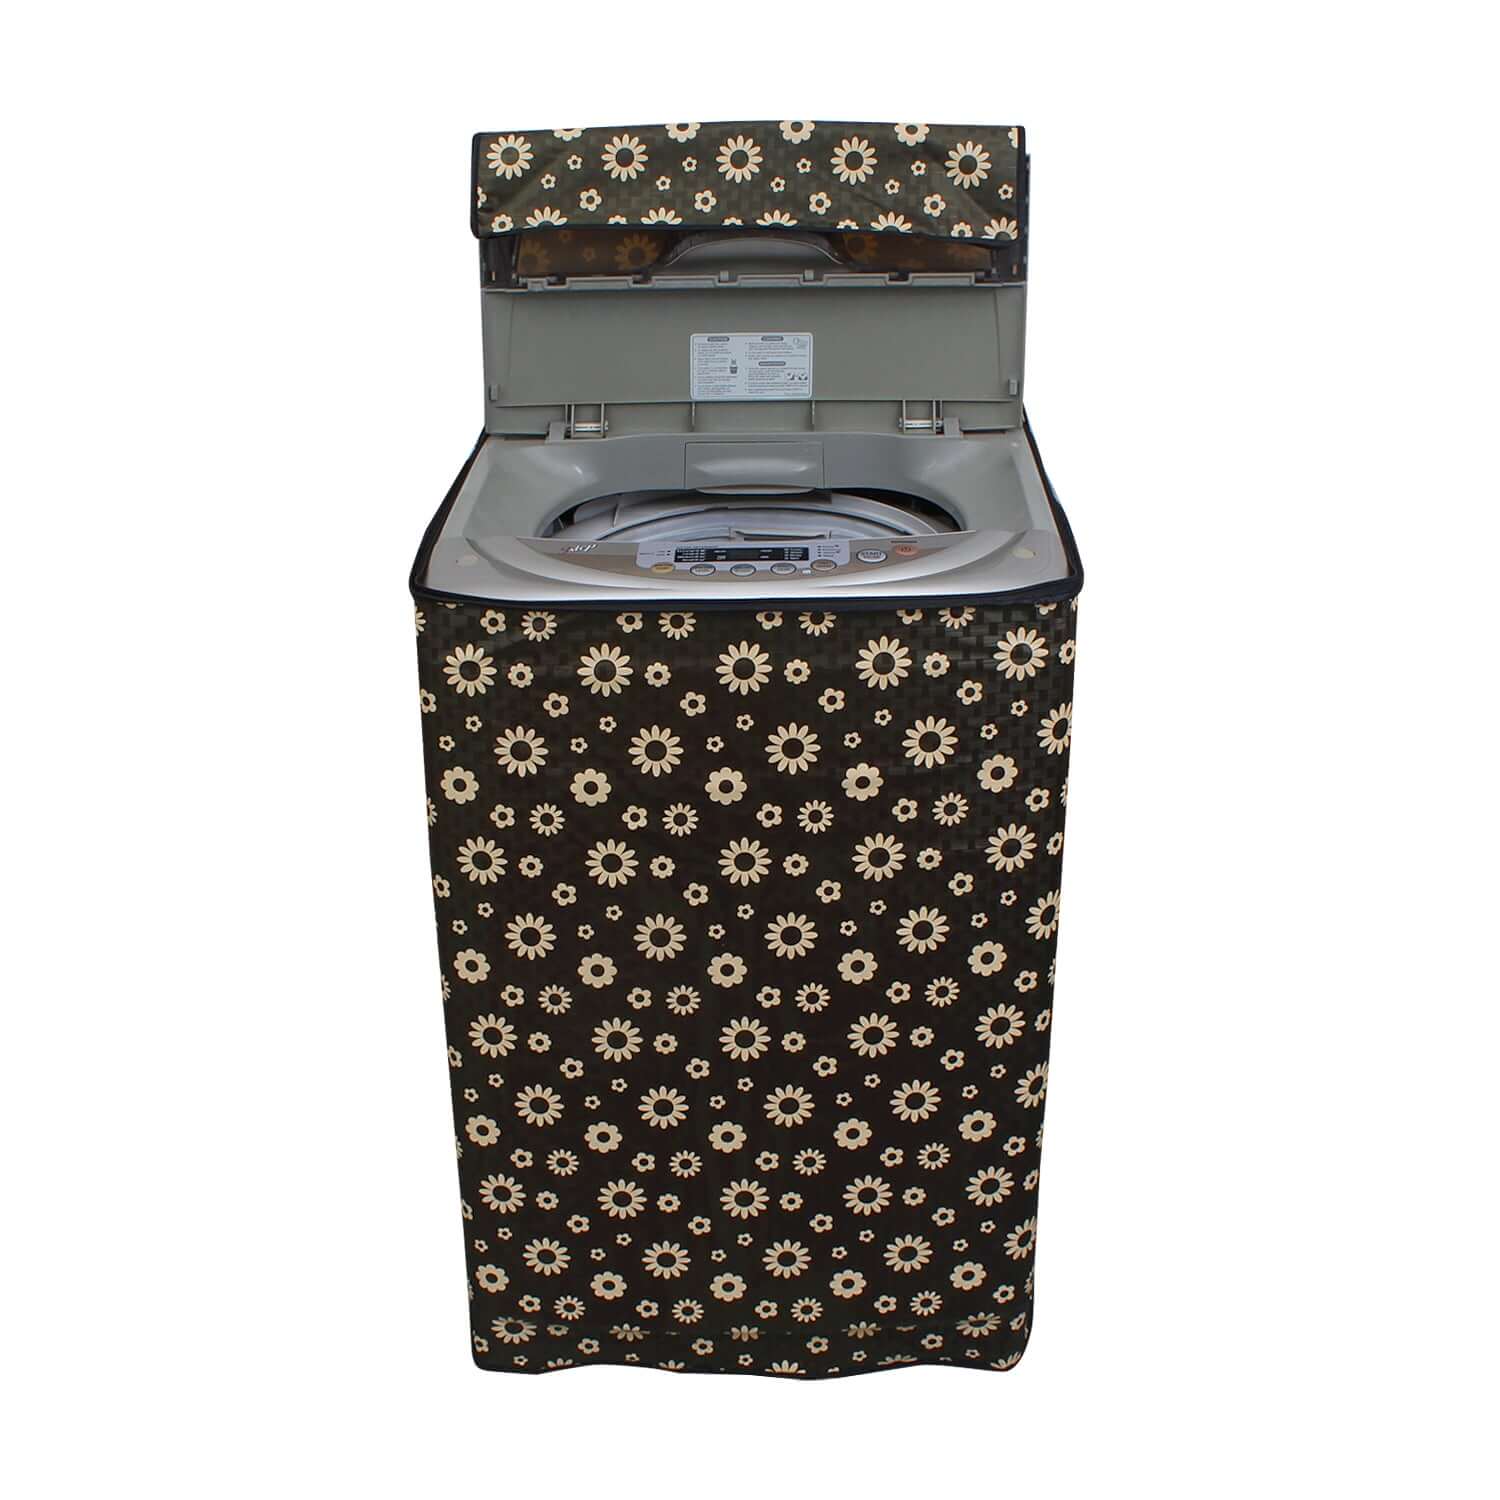 Fully Automatic Top Load Washing Machine Cover, SA35 - Dream Care Furnishings Private Limited